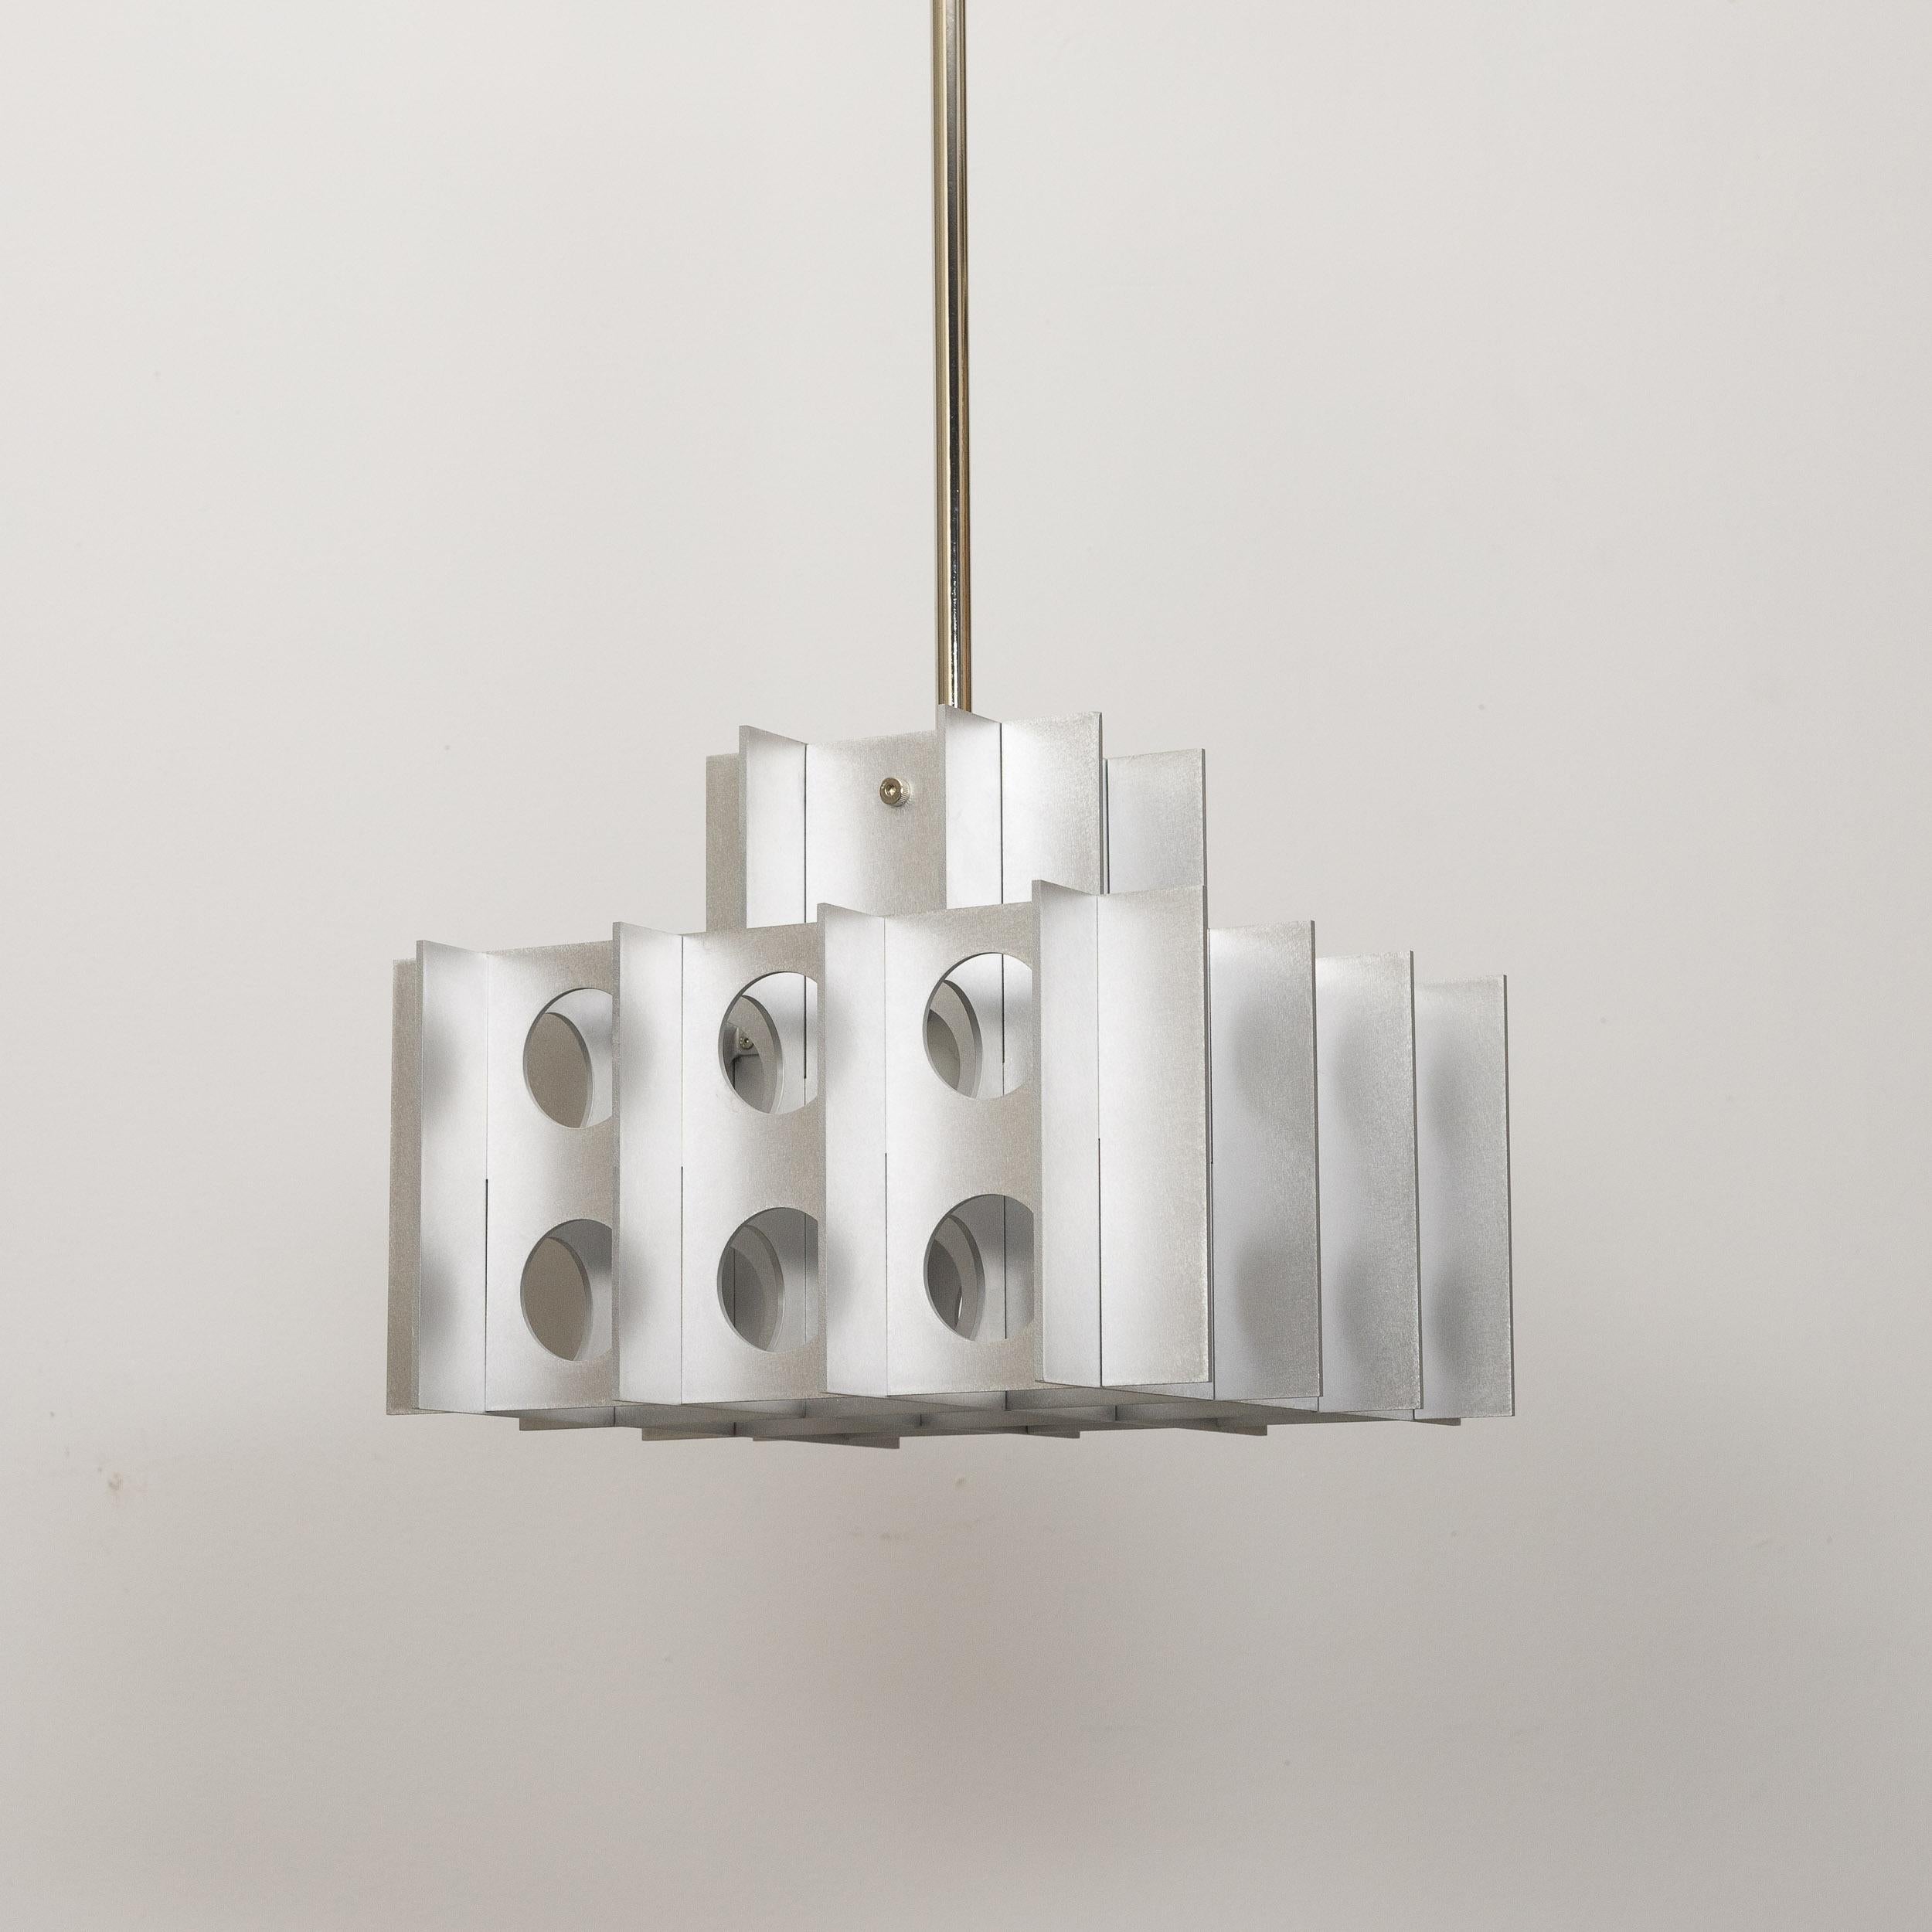 Tenfold Pendant 3TA 32inch, Waxed Aluminum, Geometric, Brutalist Ceiling Light In New Condition For Sale In Brooklyn, NY